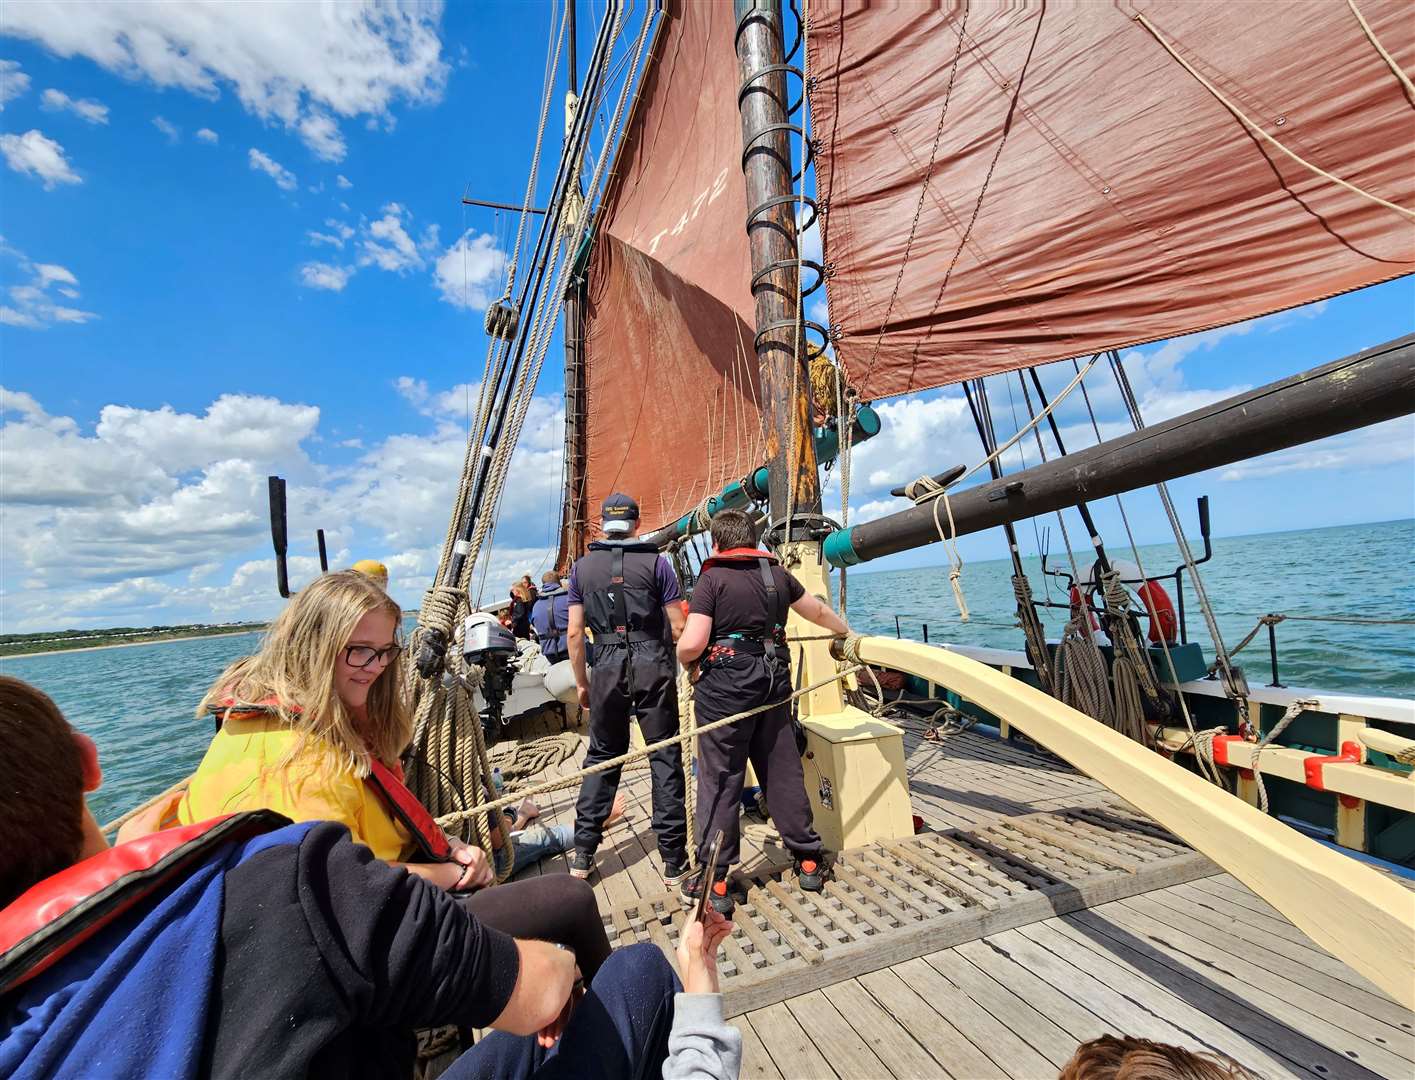 The students sailed on the Excelsior, a 102-year-old fishing boat. Credit: Barking Dog Media.